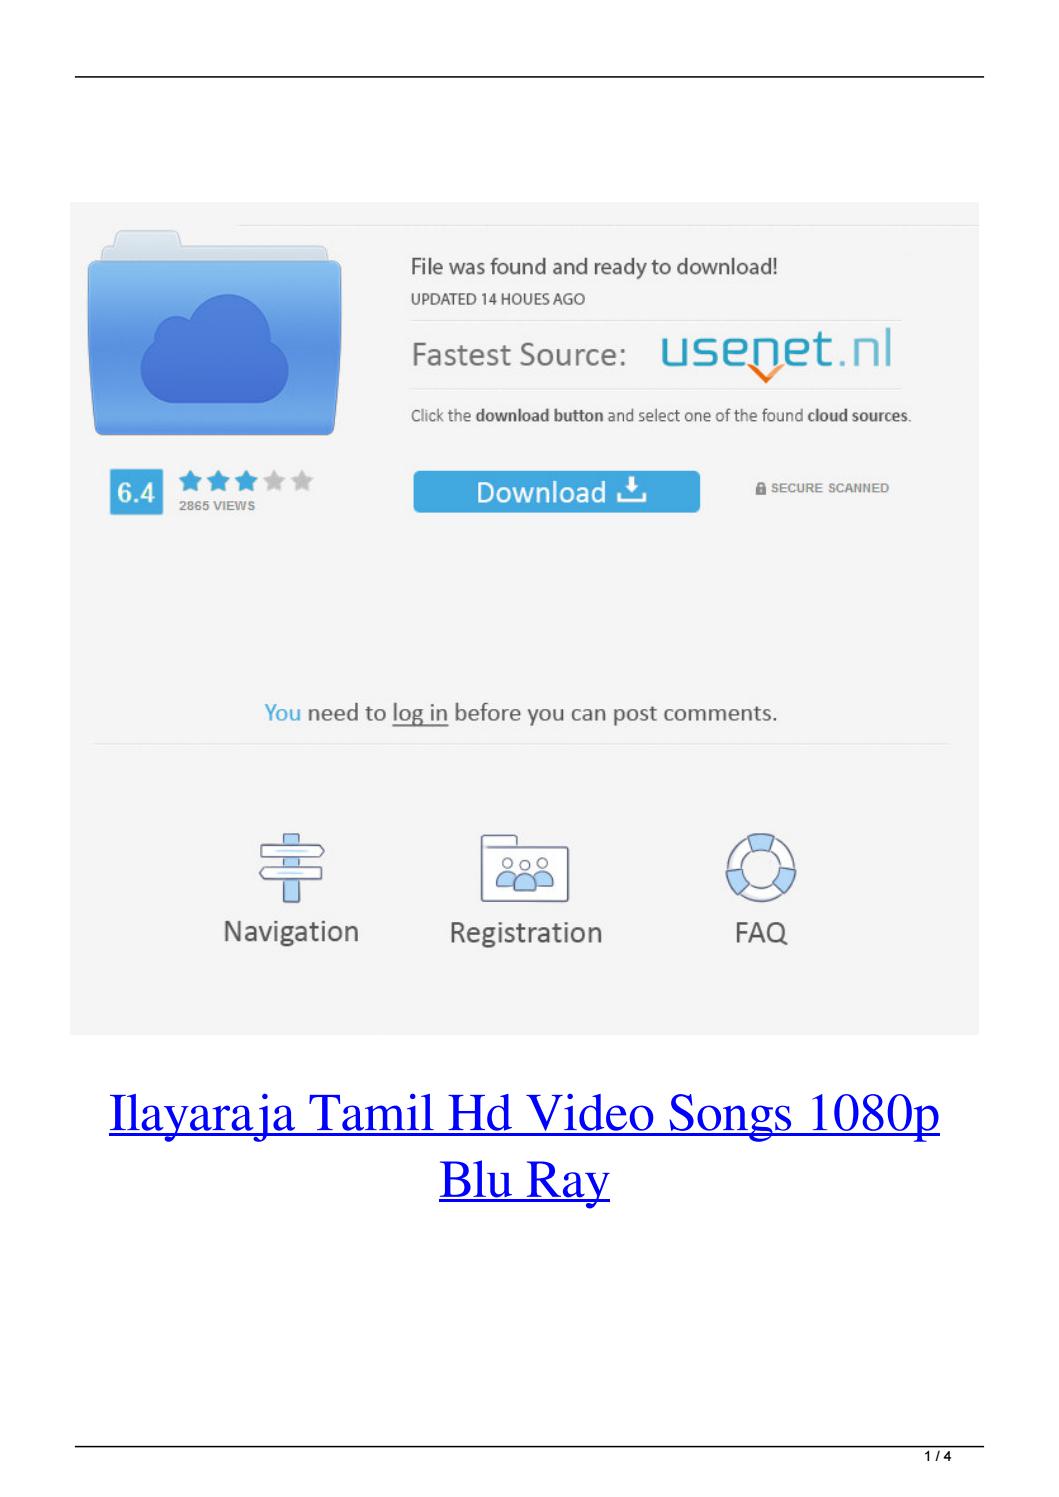 ilayaraja melody mp3 song in compressed file